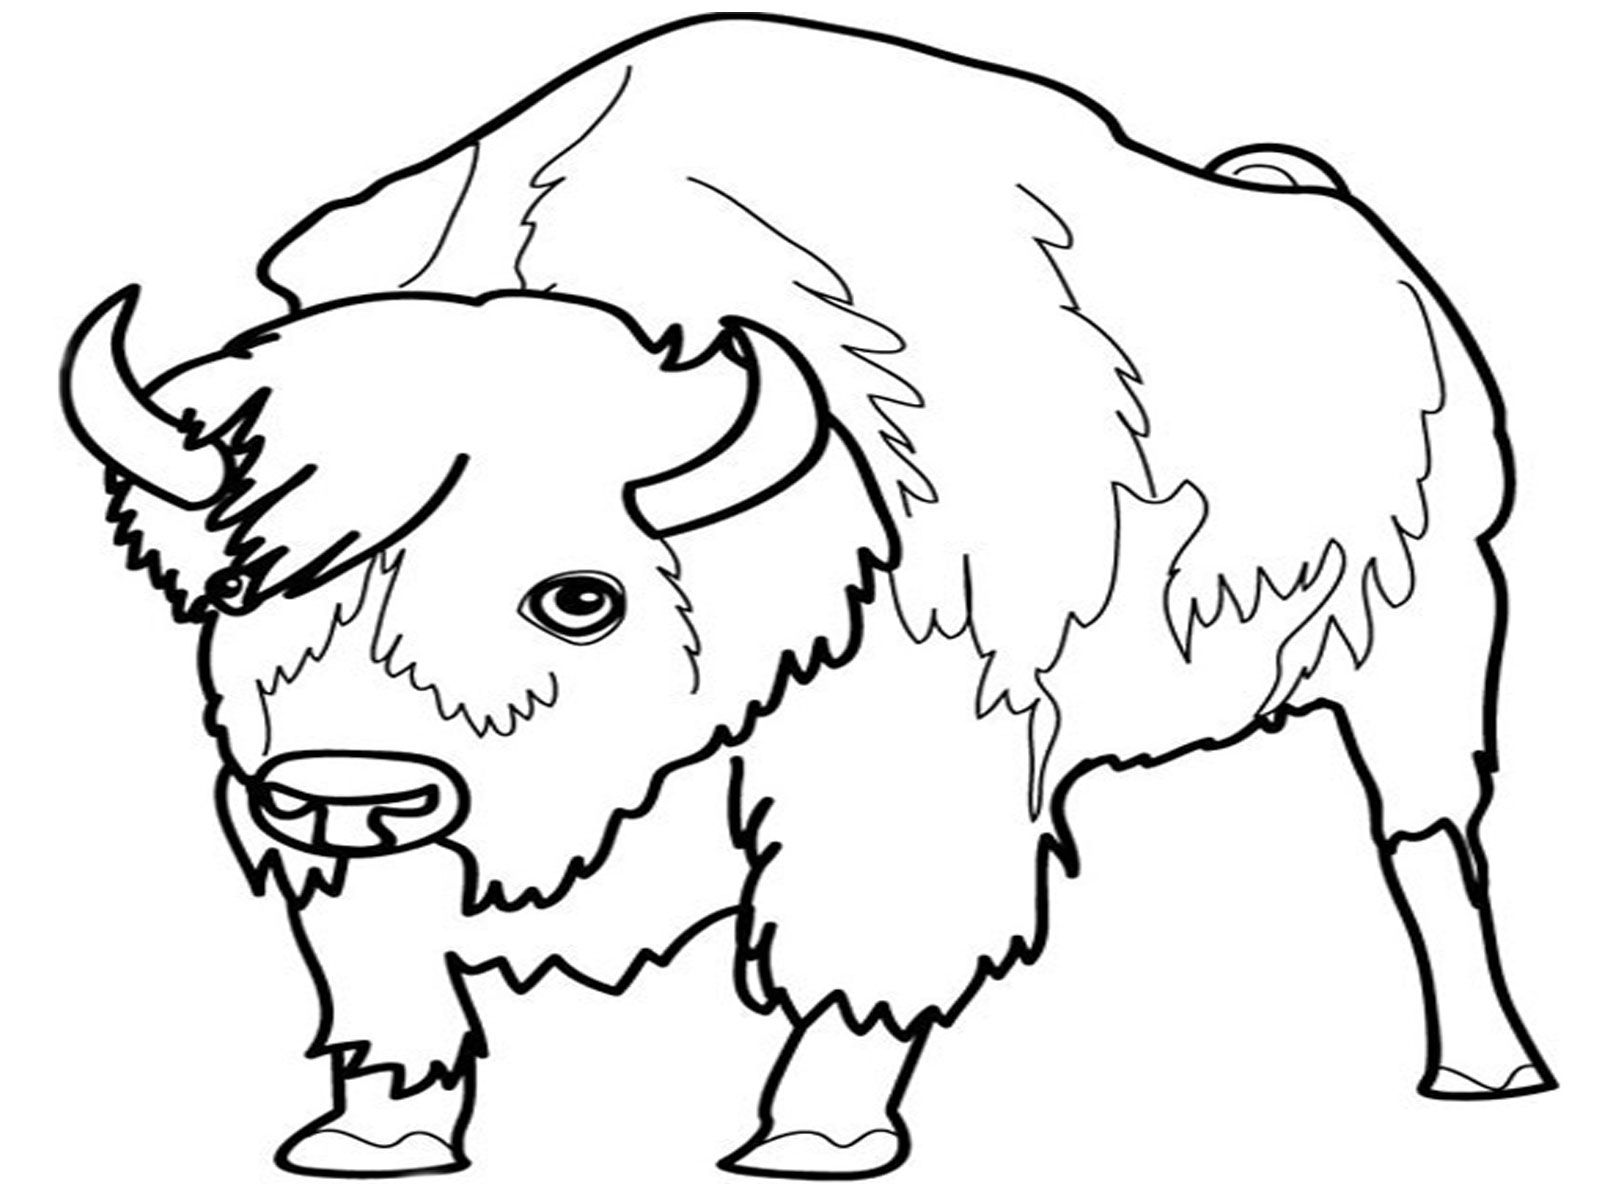 8 Pics of European Animals Coloring Page - European Starling ...